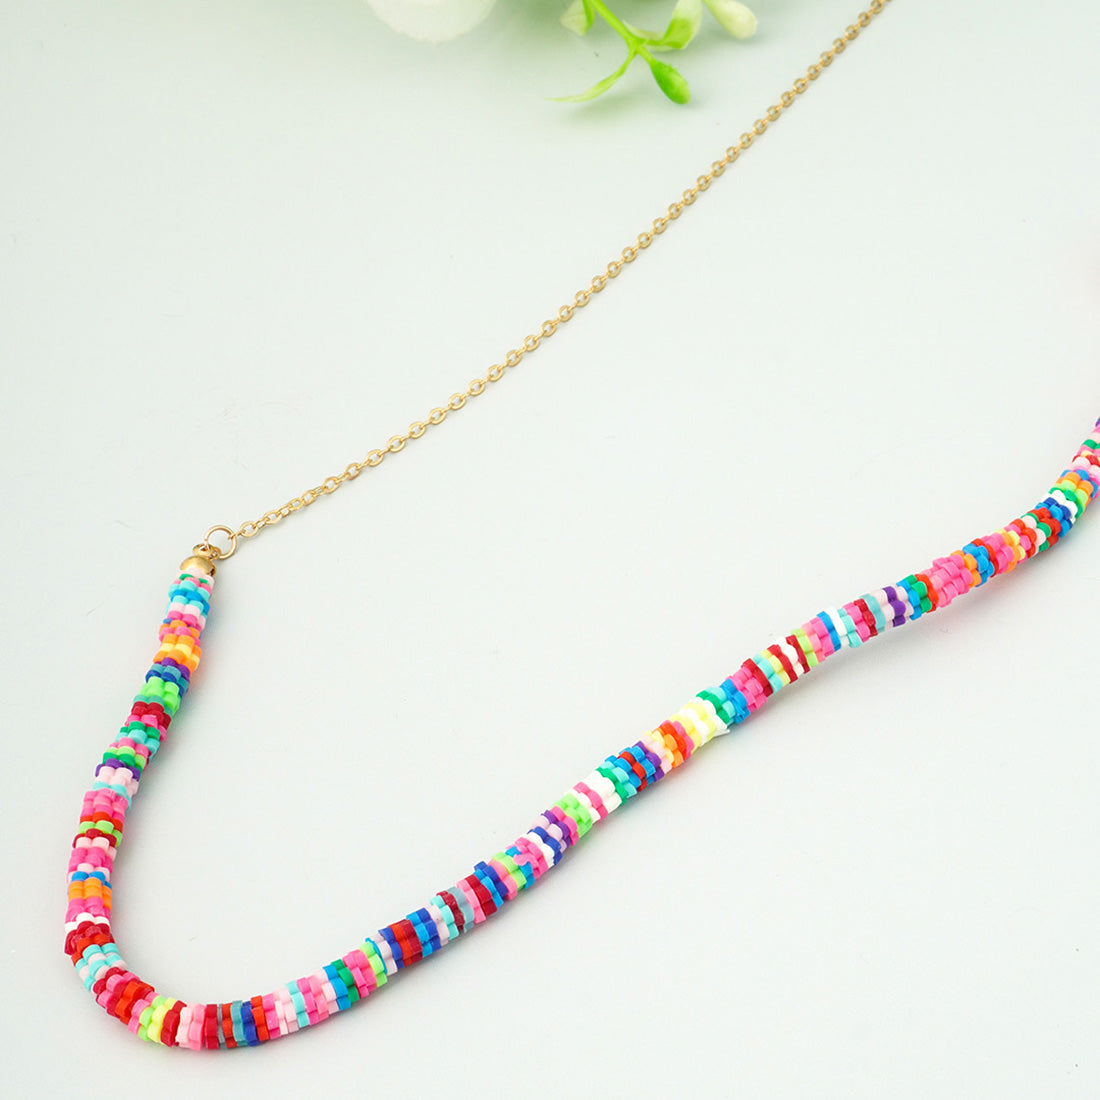 Colorfully Beaded Belly Chain